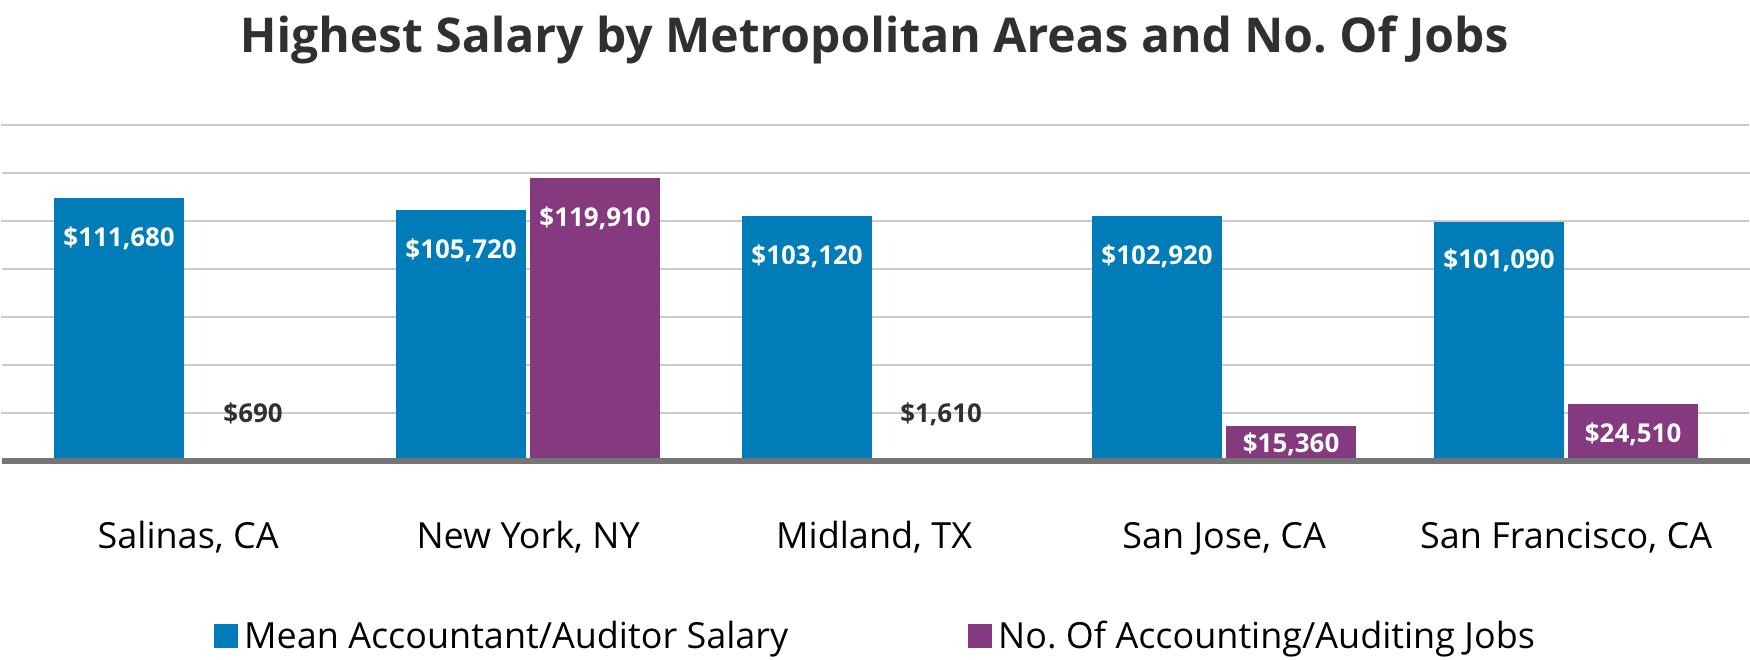 Highest Average Accountant Salary by Metropolitan Areas